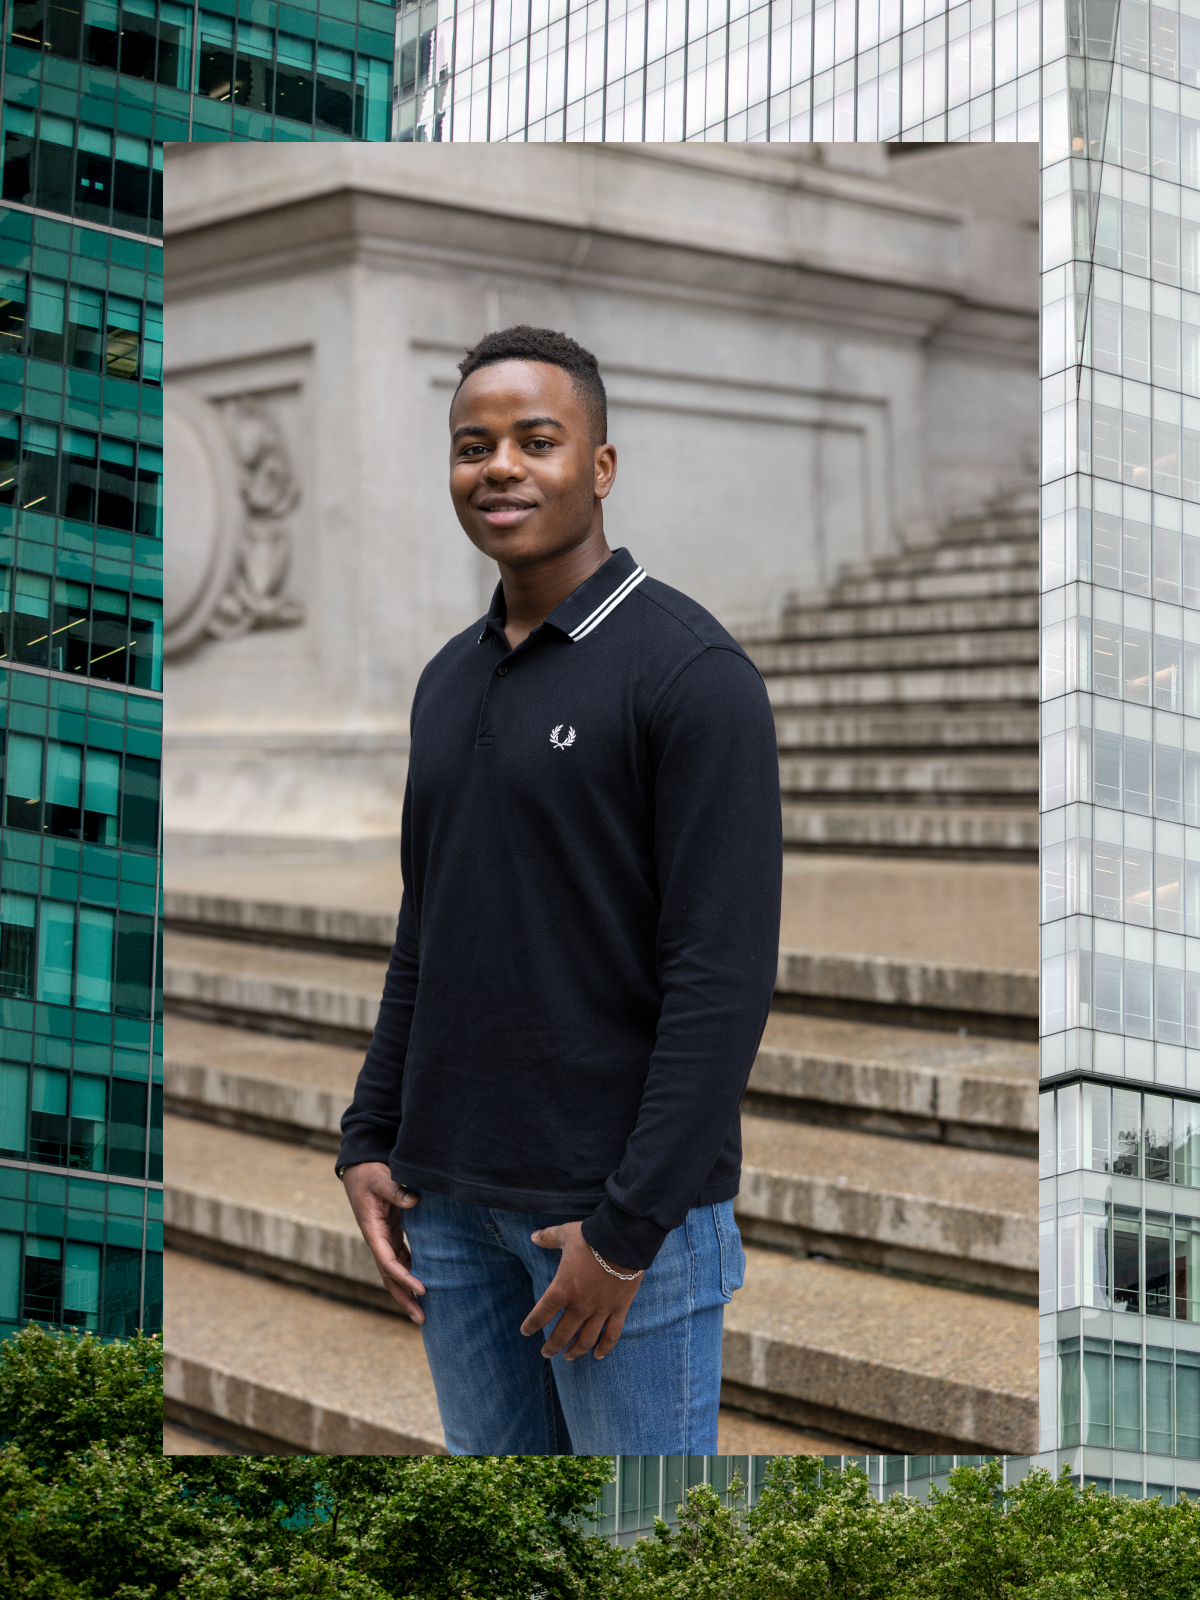 David Obwaya, a senior student of color studying economics at the College of Arts and Science, stands on NYU steps.